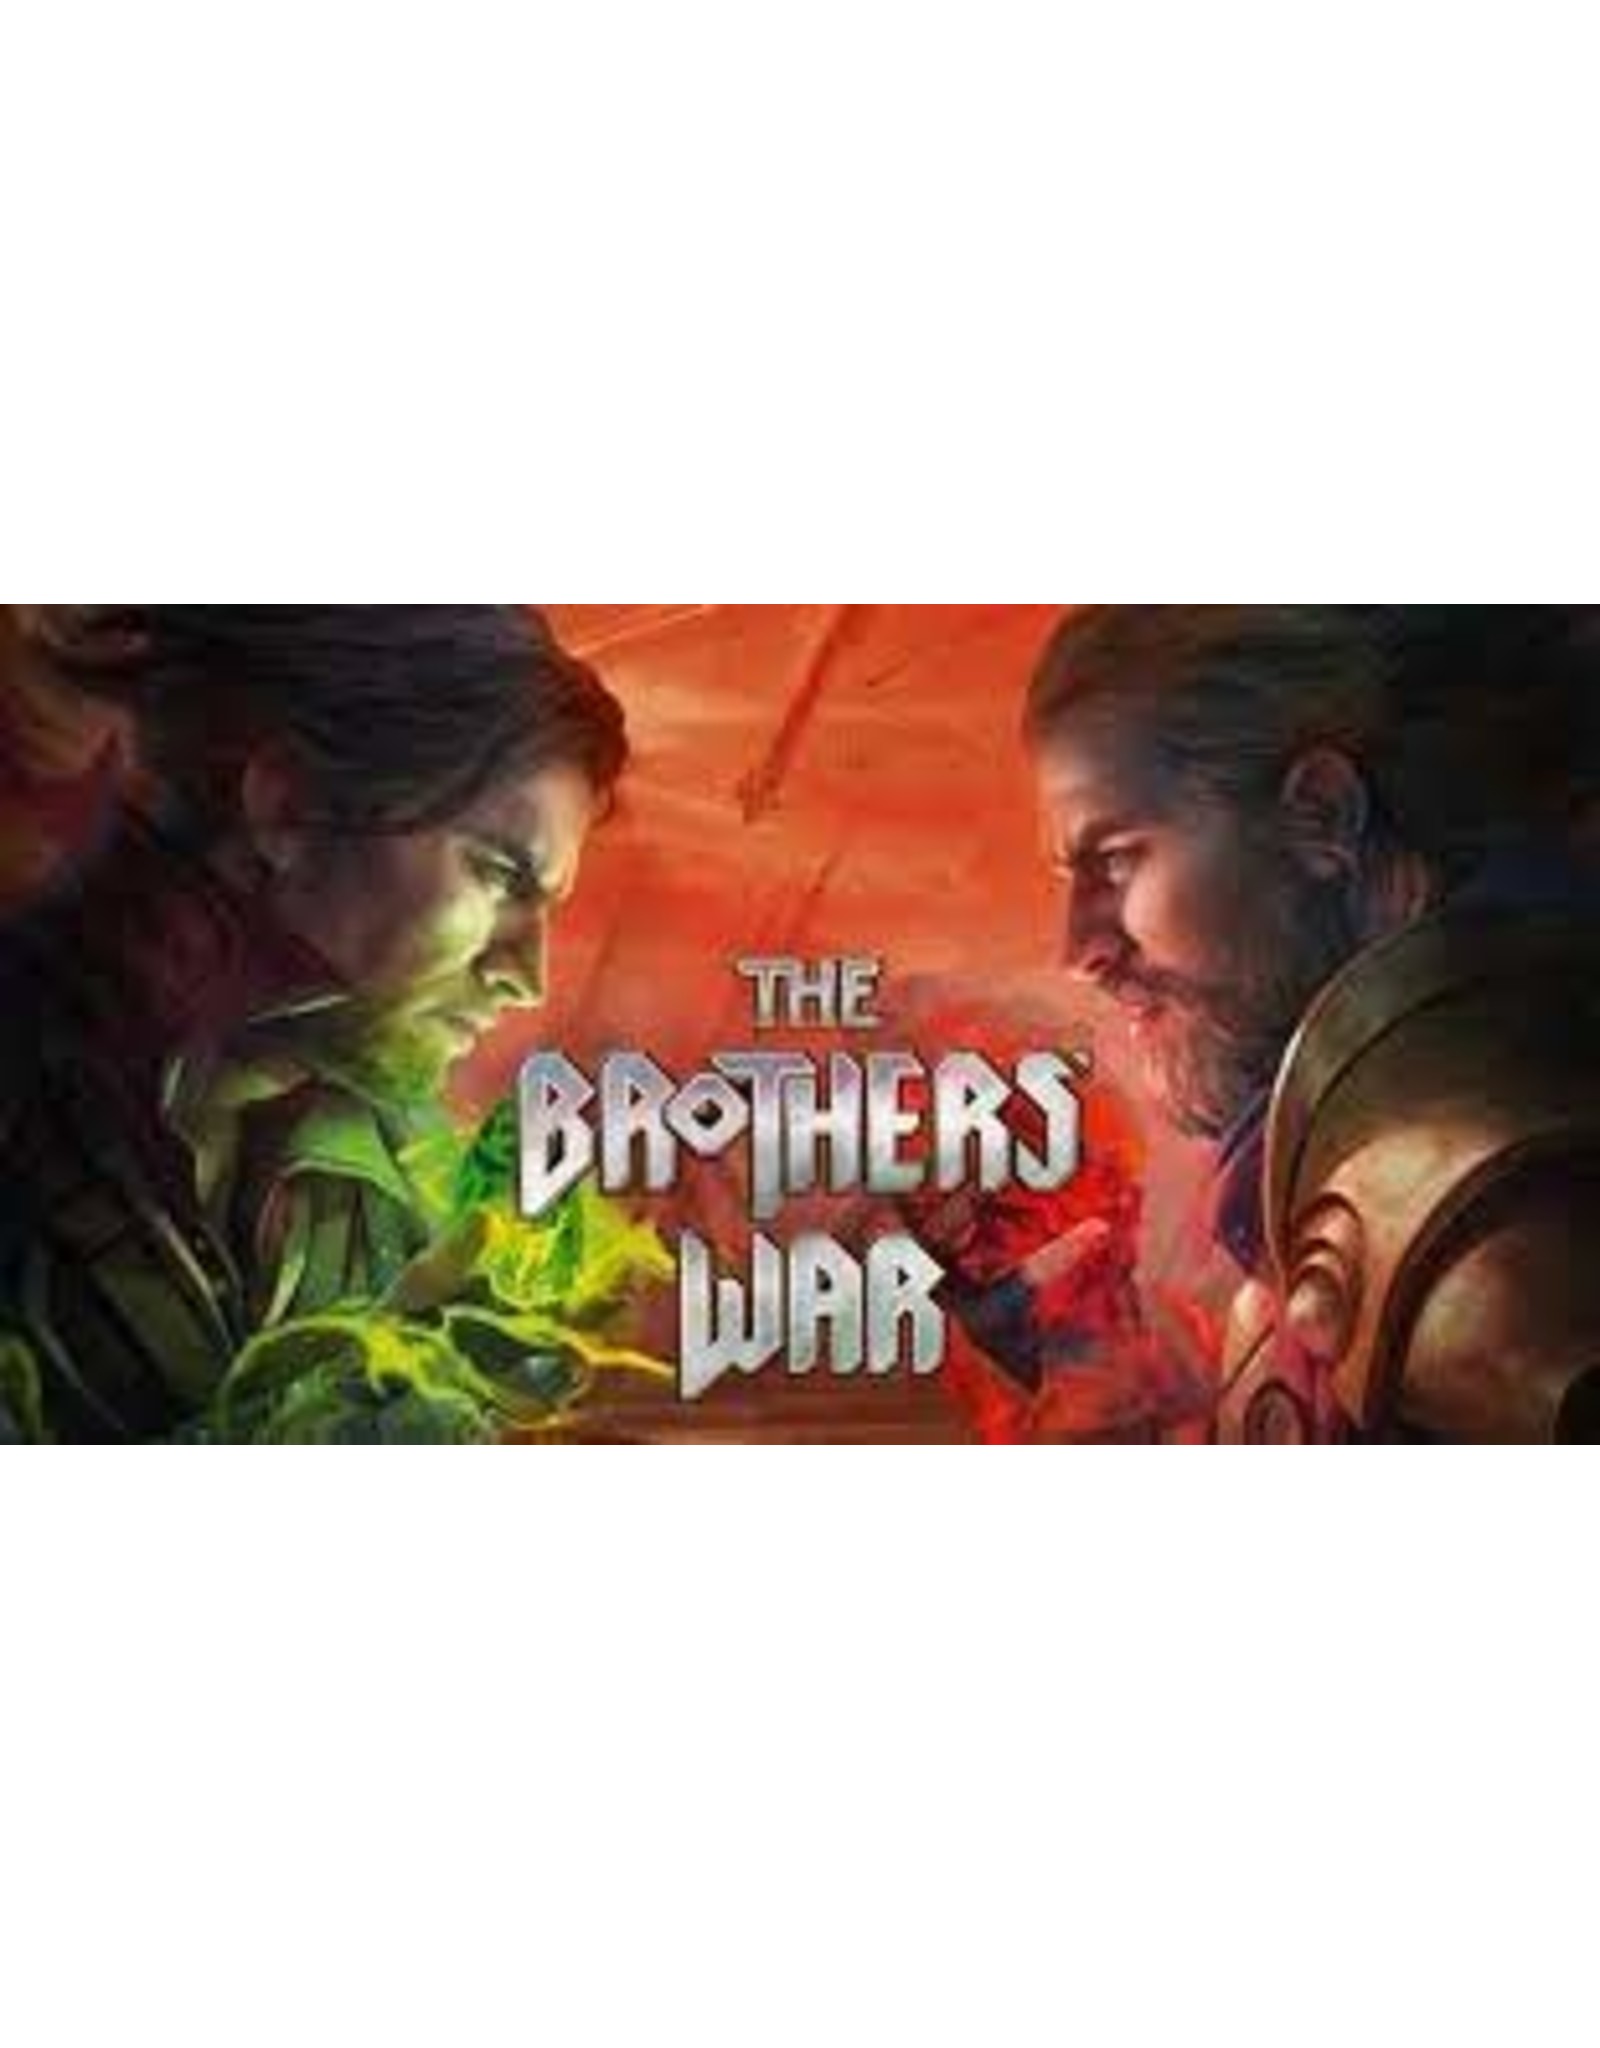 Gift of Games MtG Brothers War Two Headed Giant! 12/2 7PM